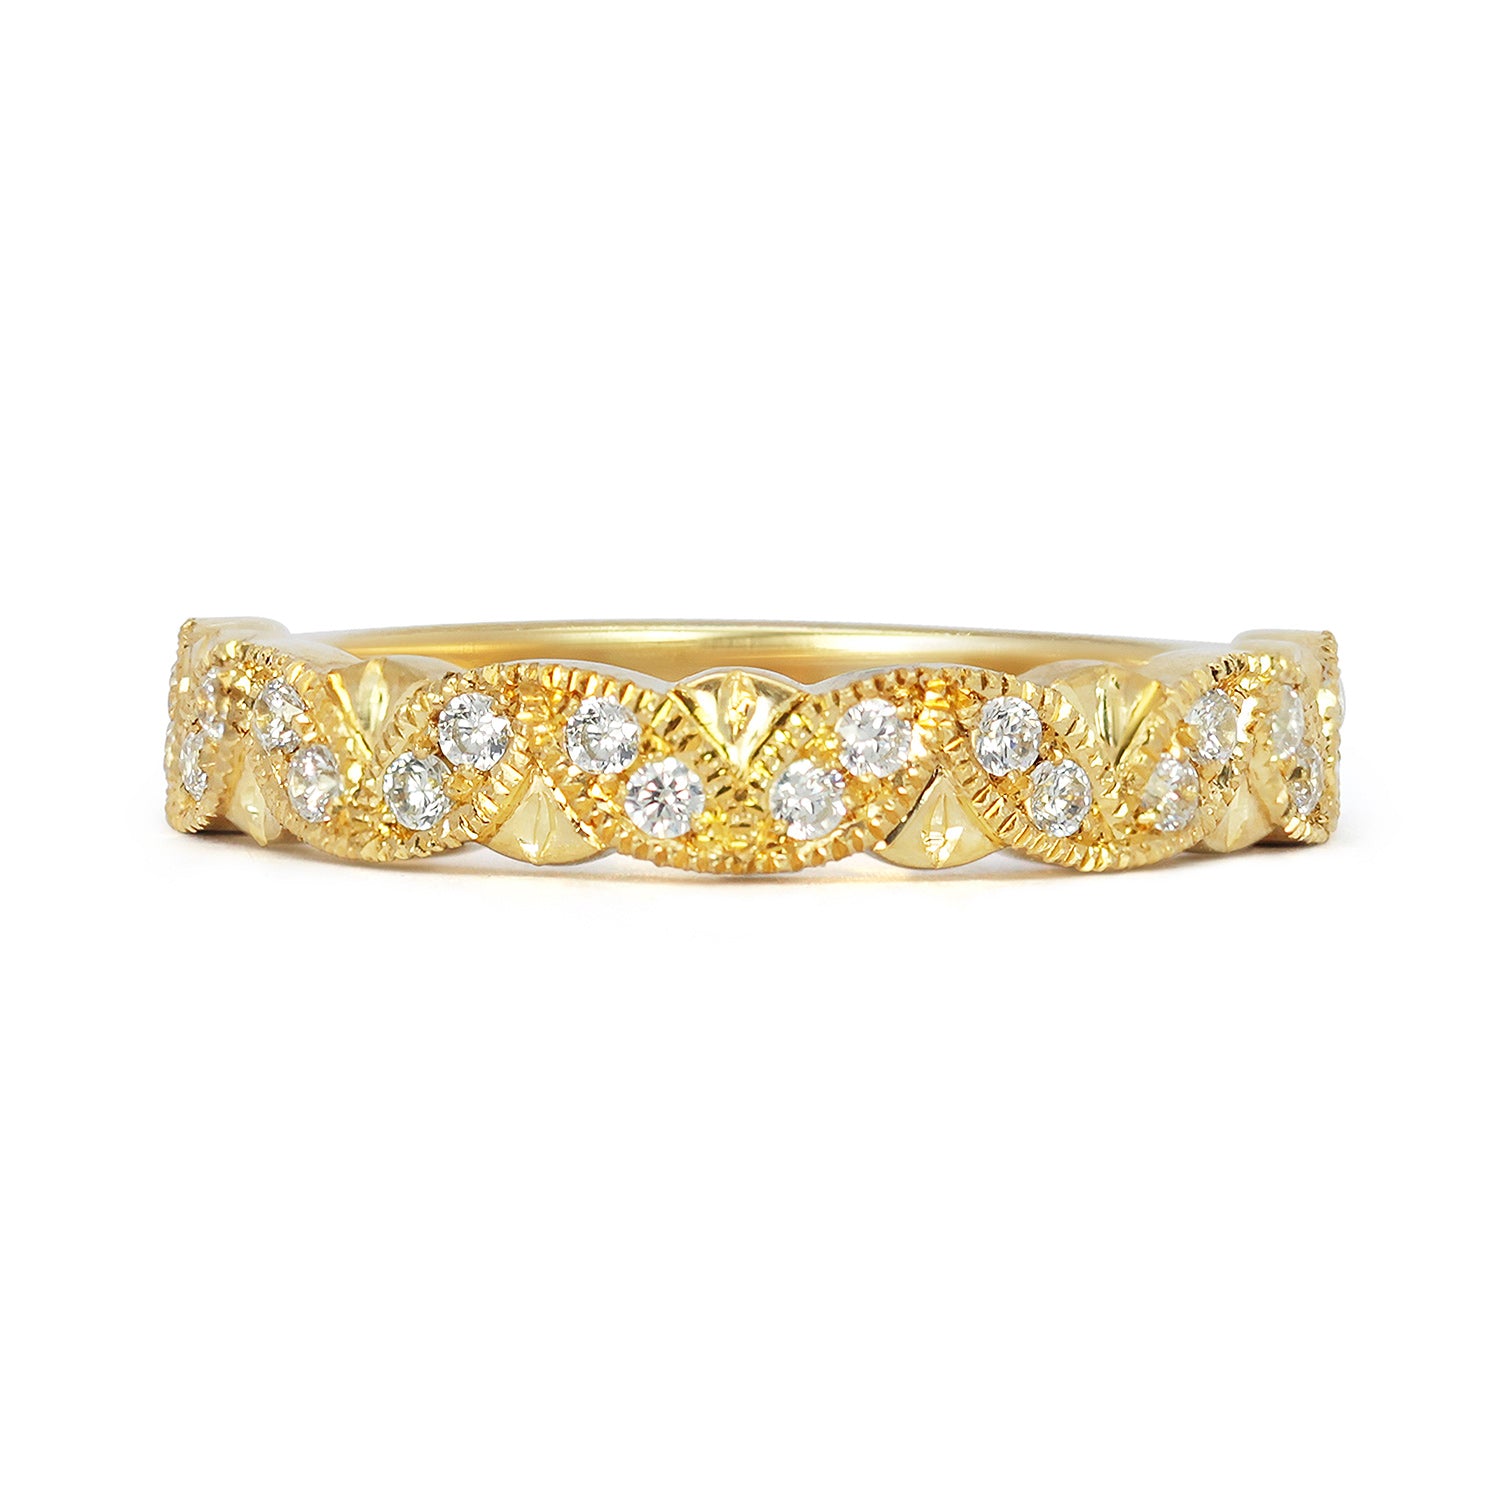 Lebrusan Studio vintage-style ethical gold wedding band with scalloped edging, hand-engraved milgrain beading and petals and 20 conflict-free brilliant cut diamonds